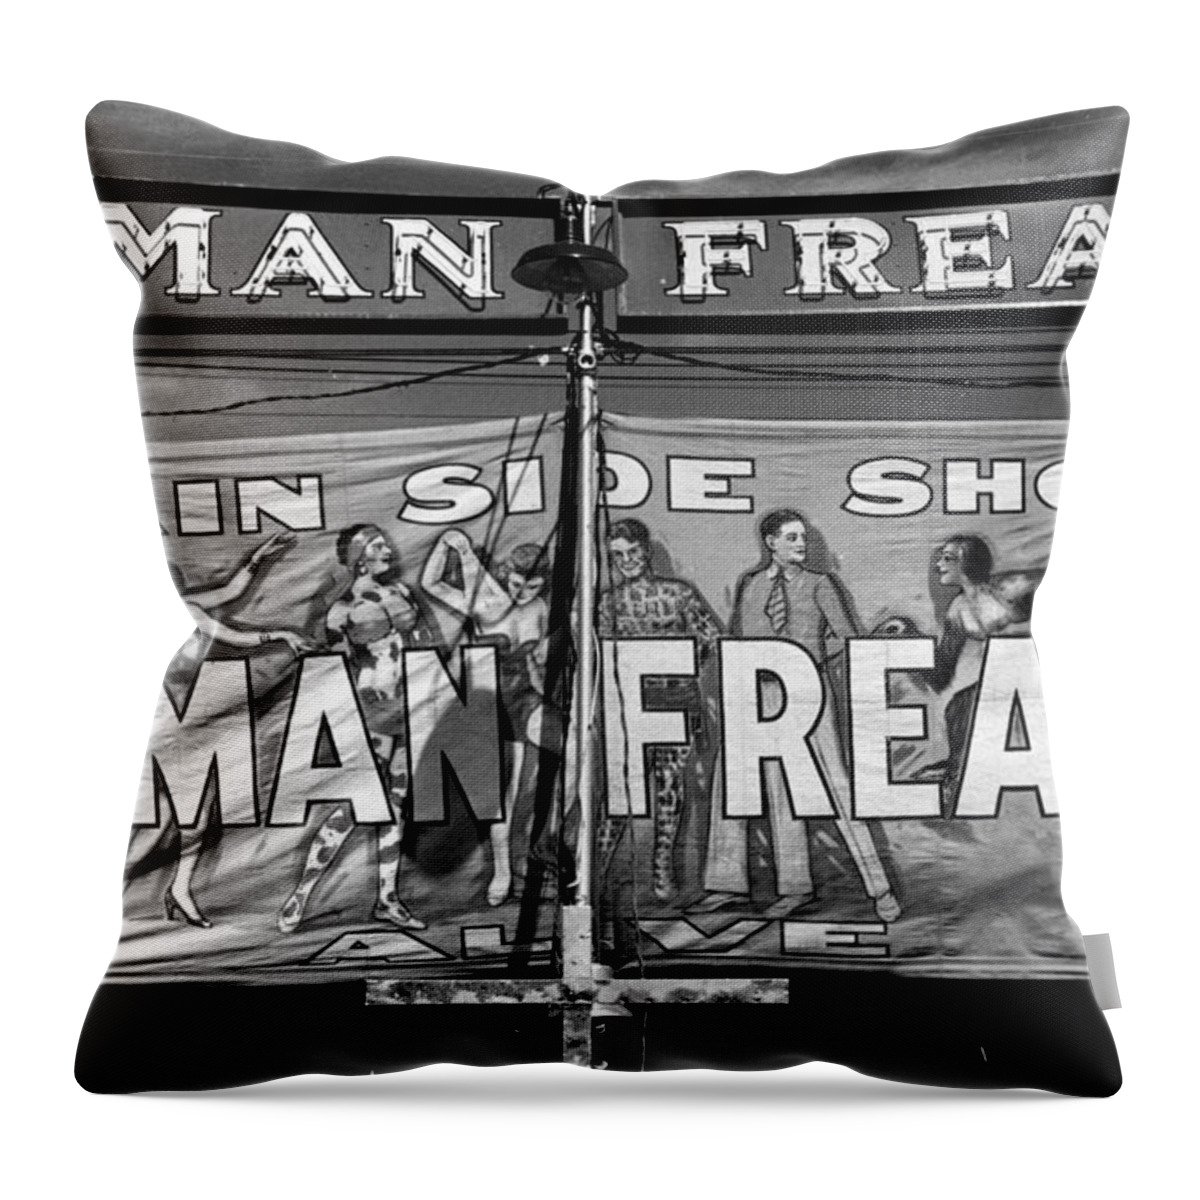 1941 Throw Pillow featuring the photograph Vermont Sideshow, 1941 by Granger